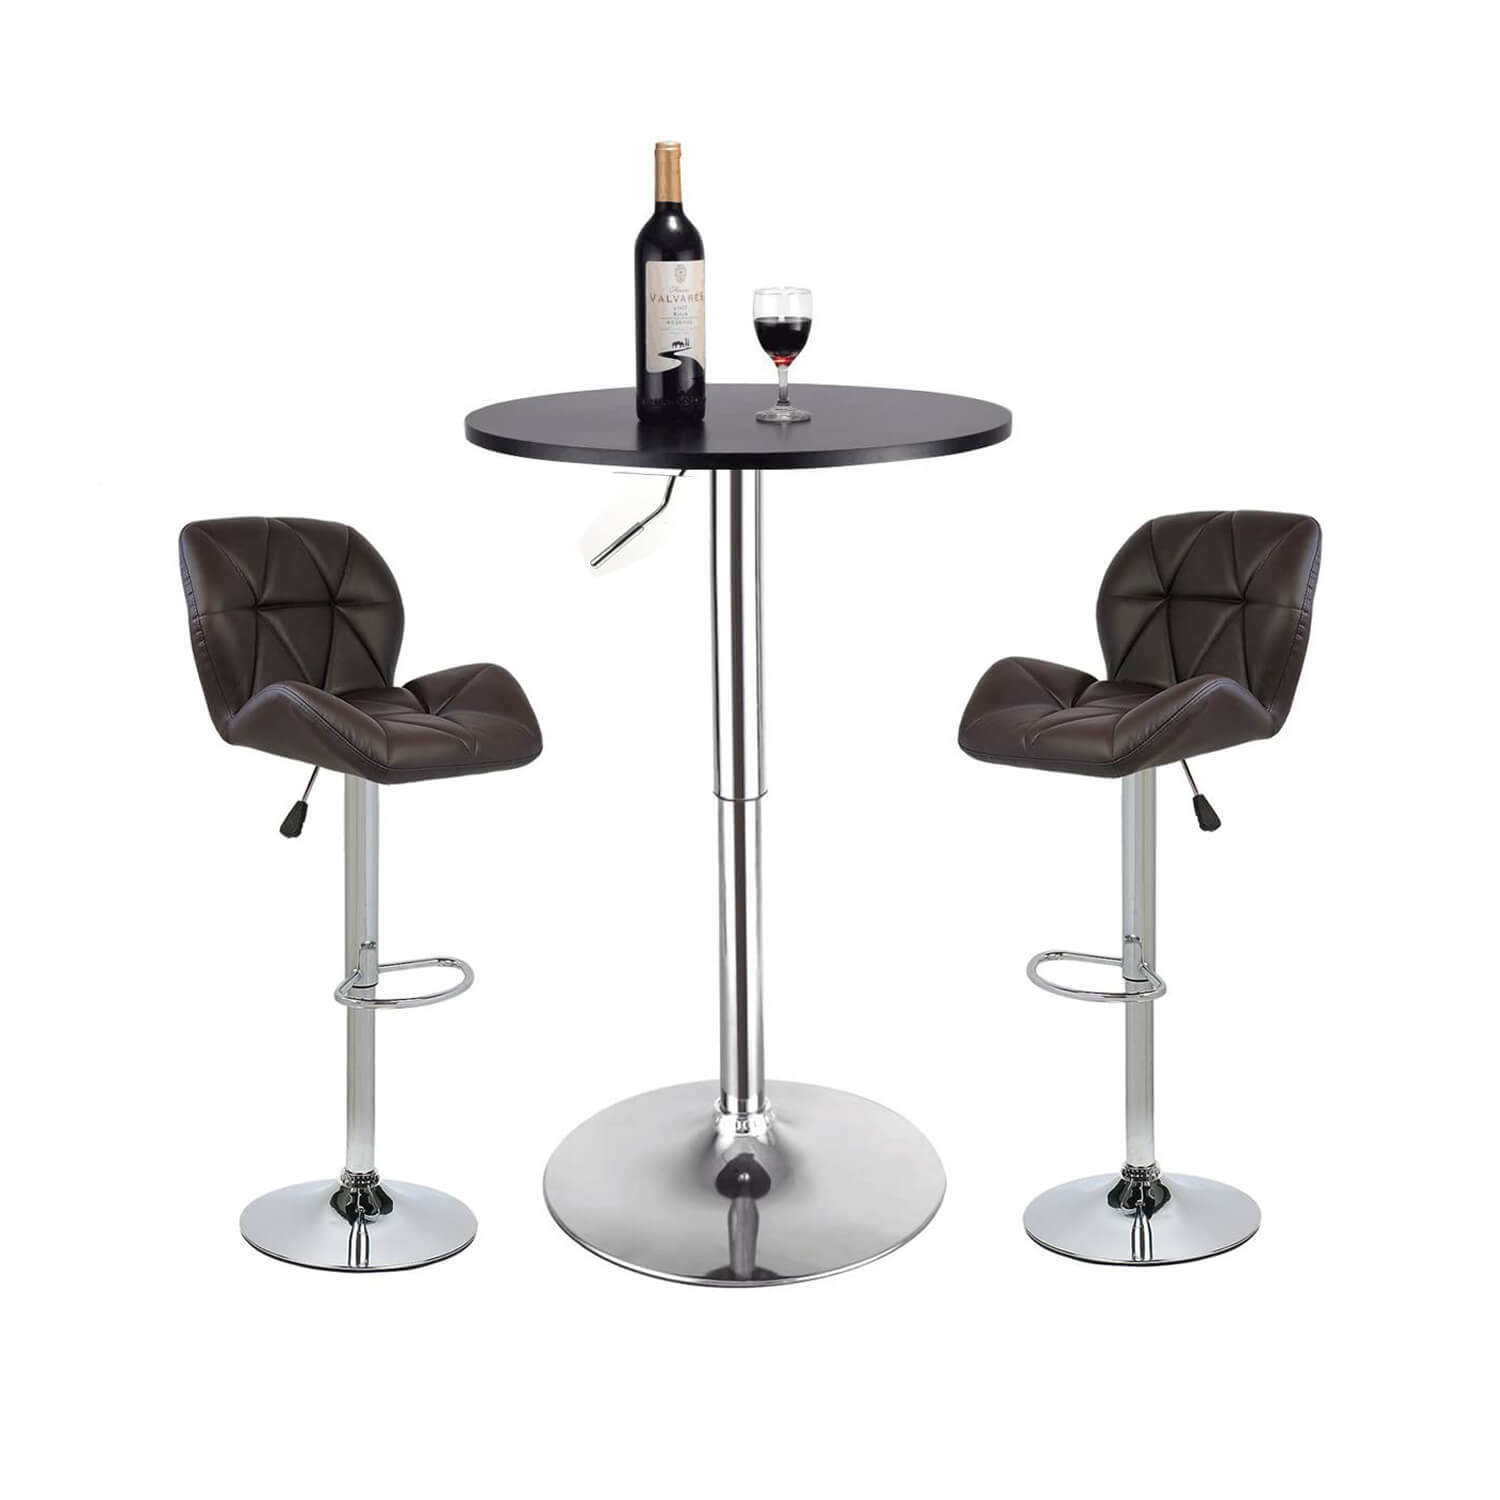 Elecwish Bar Table Set 3-Piece OW0301 black bar table with brown bar stools